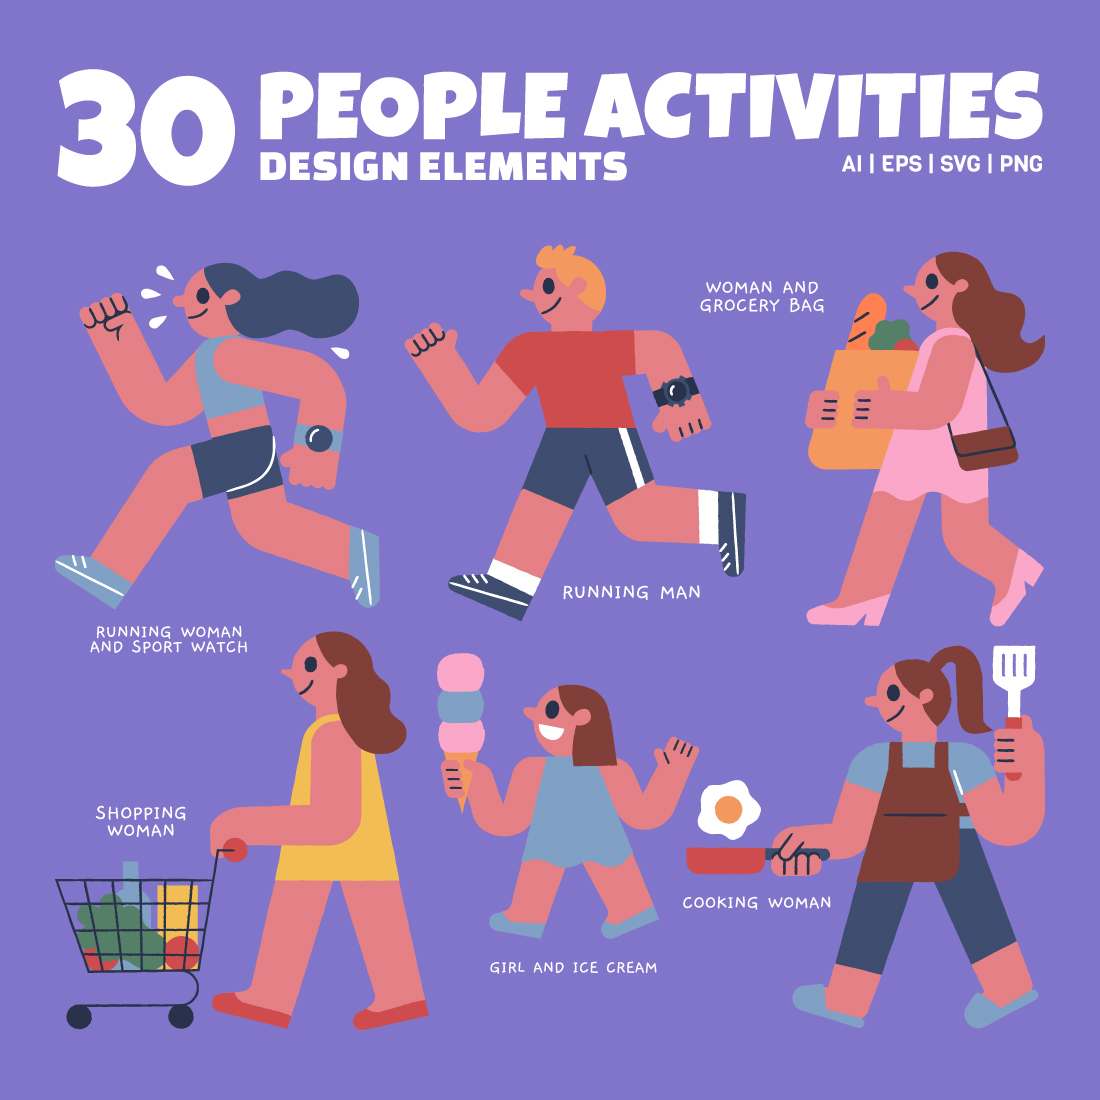 30 People Activities Design Elements cover image.